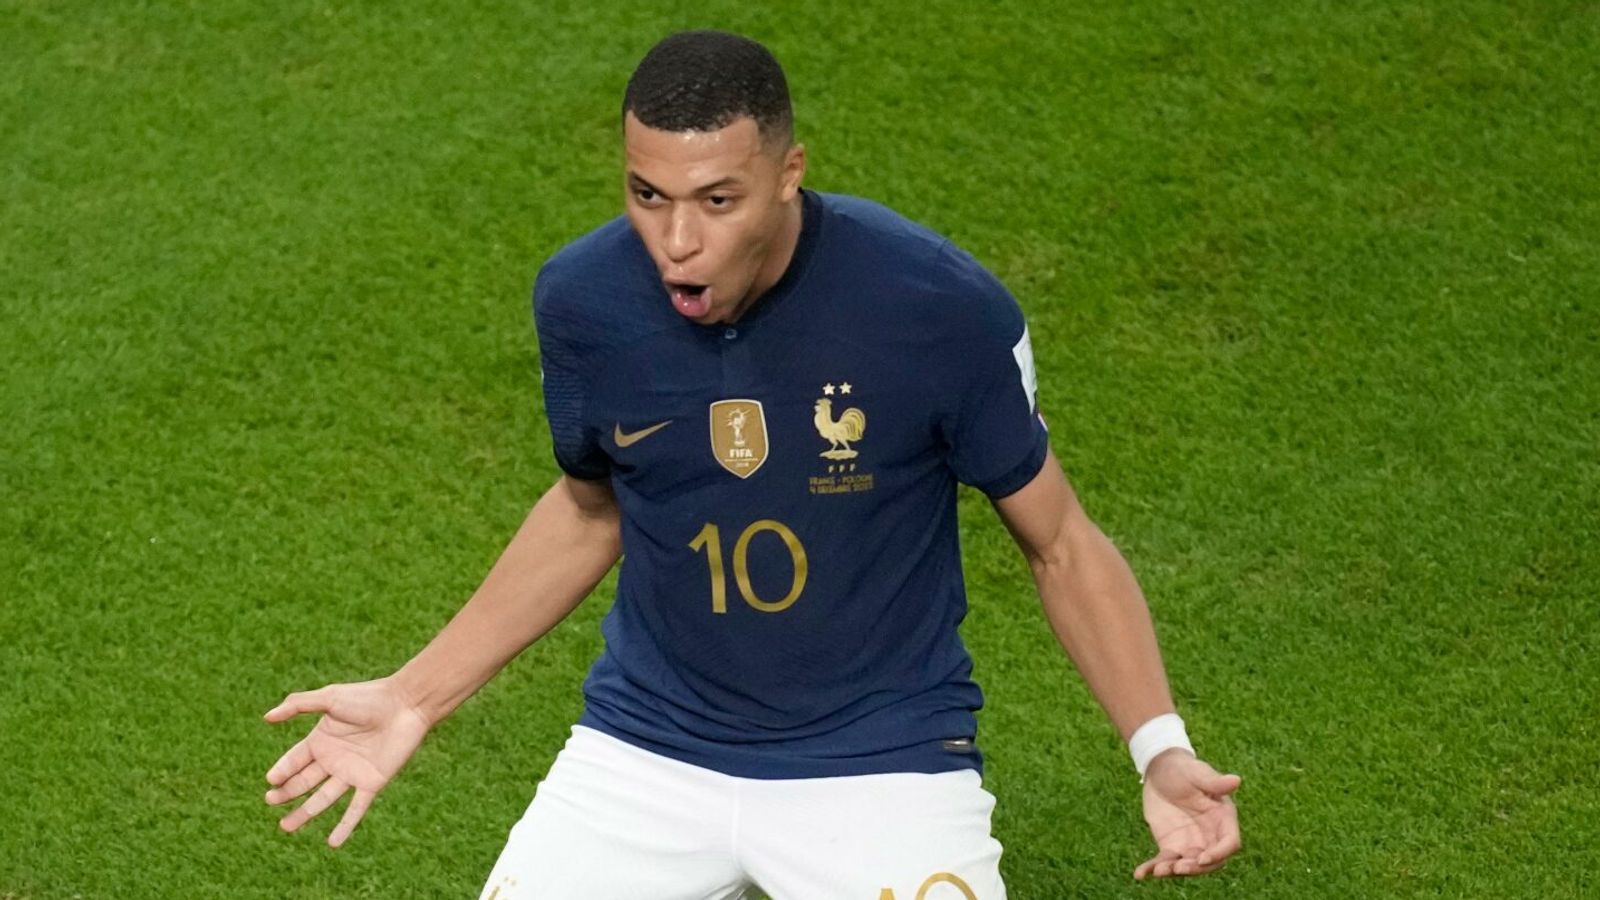 Mbappe misses France open training | Holland: We'll pay him 'special attention'